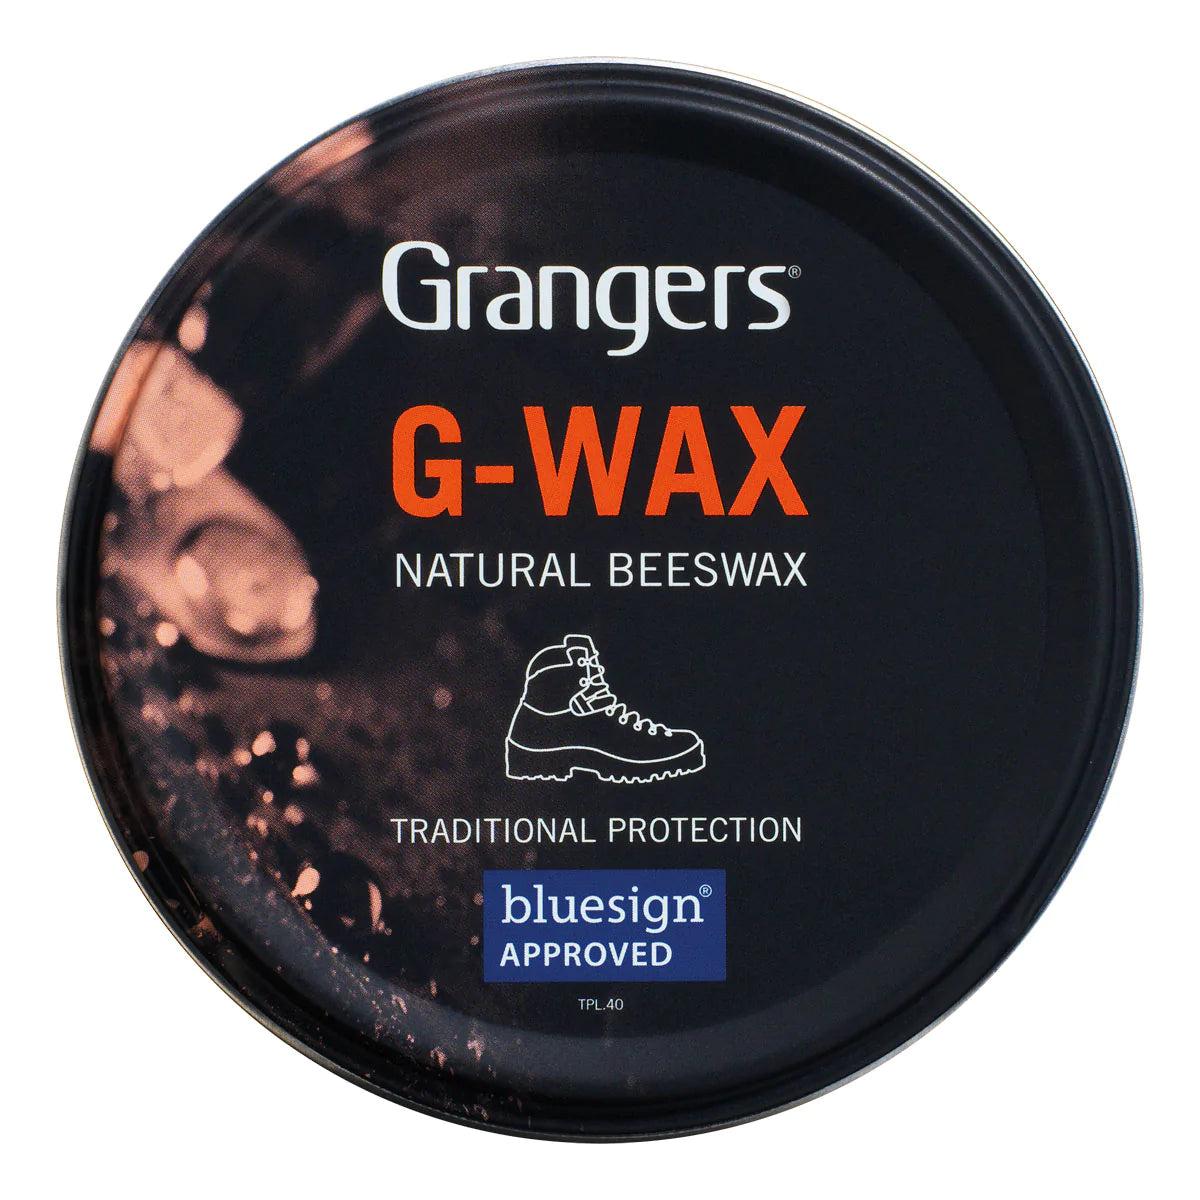 Grangers G-Wax Natural Beeswax Leather Waterproofer & Conditioner - 80g